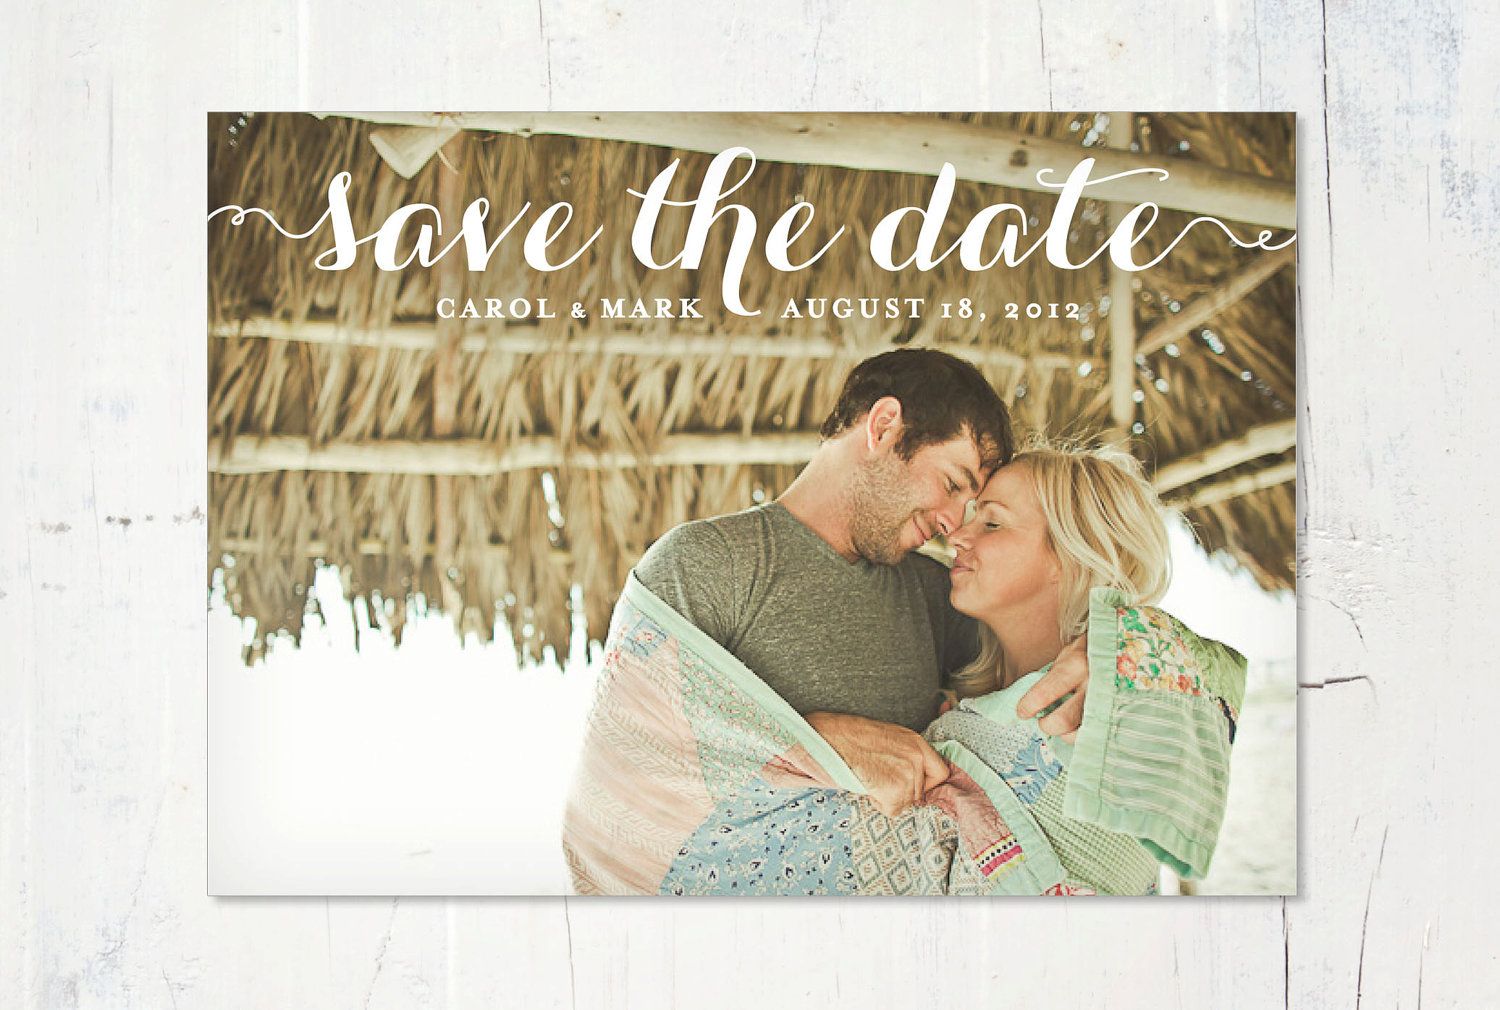 “Save the Date” Ideas